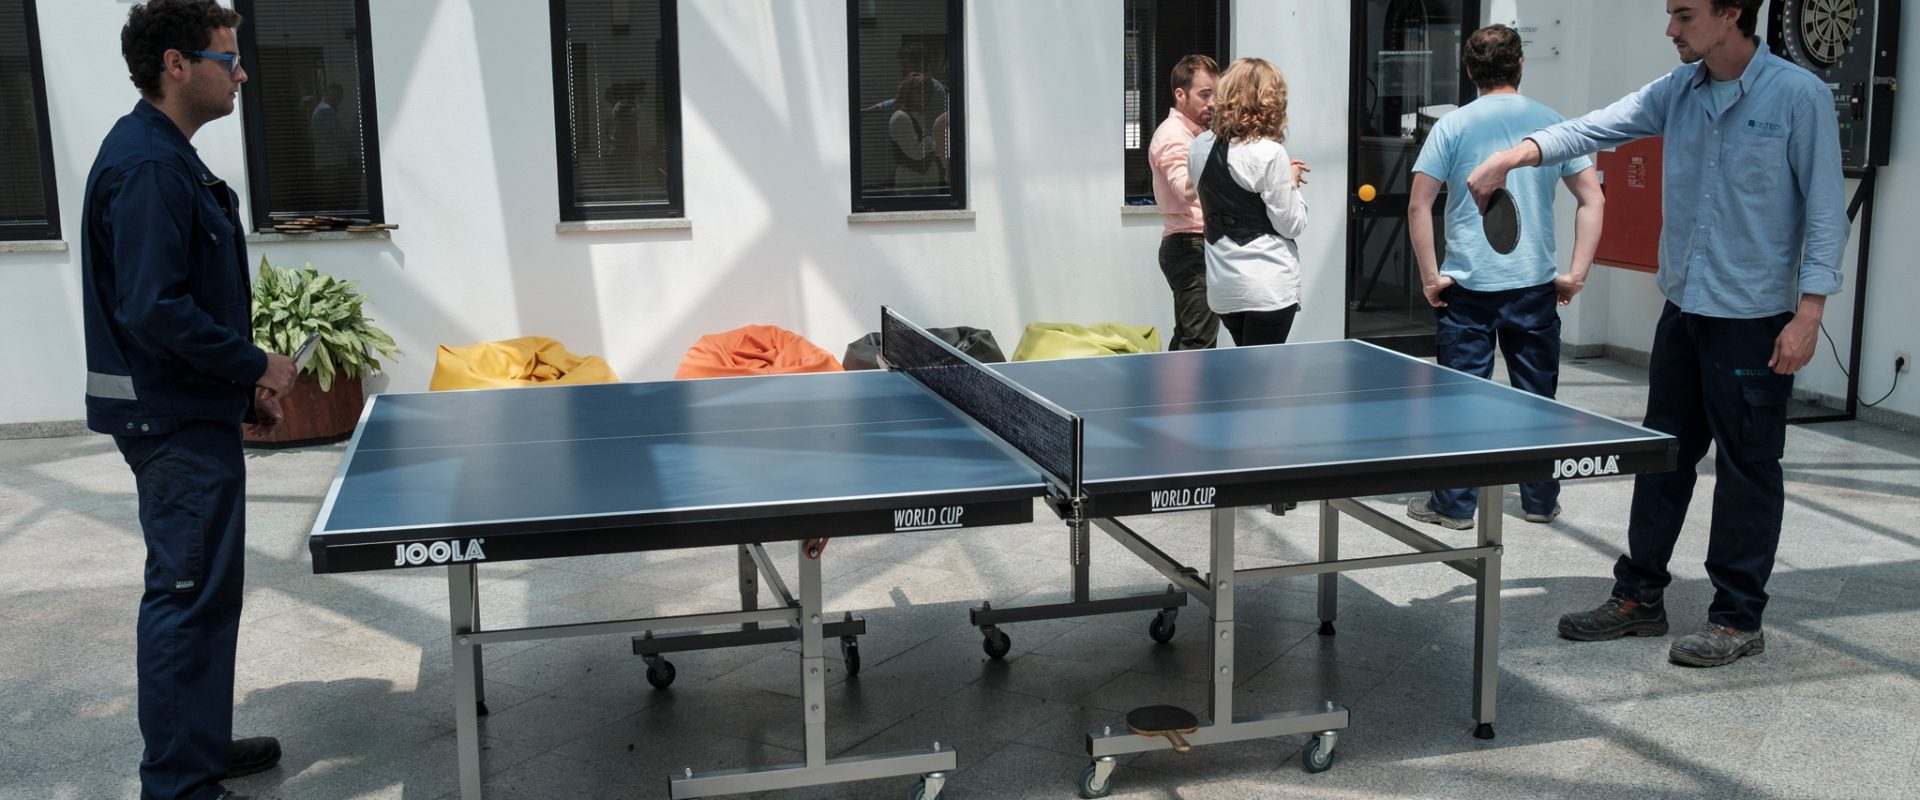 Ping-pong, table football, running and football are some of the modalities that integrate the Celtejo Olympics